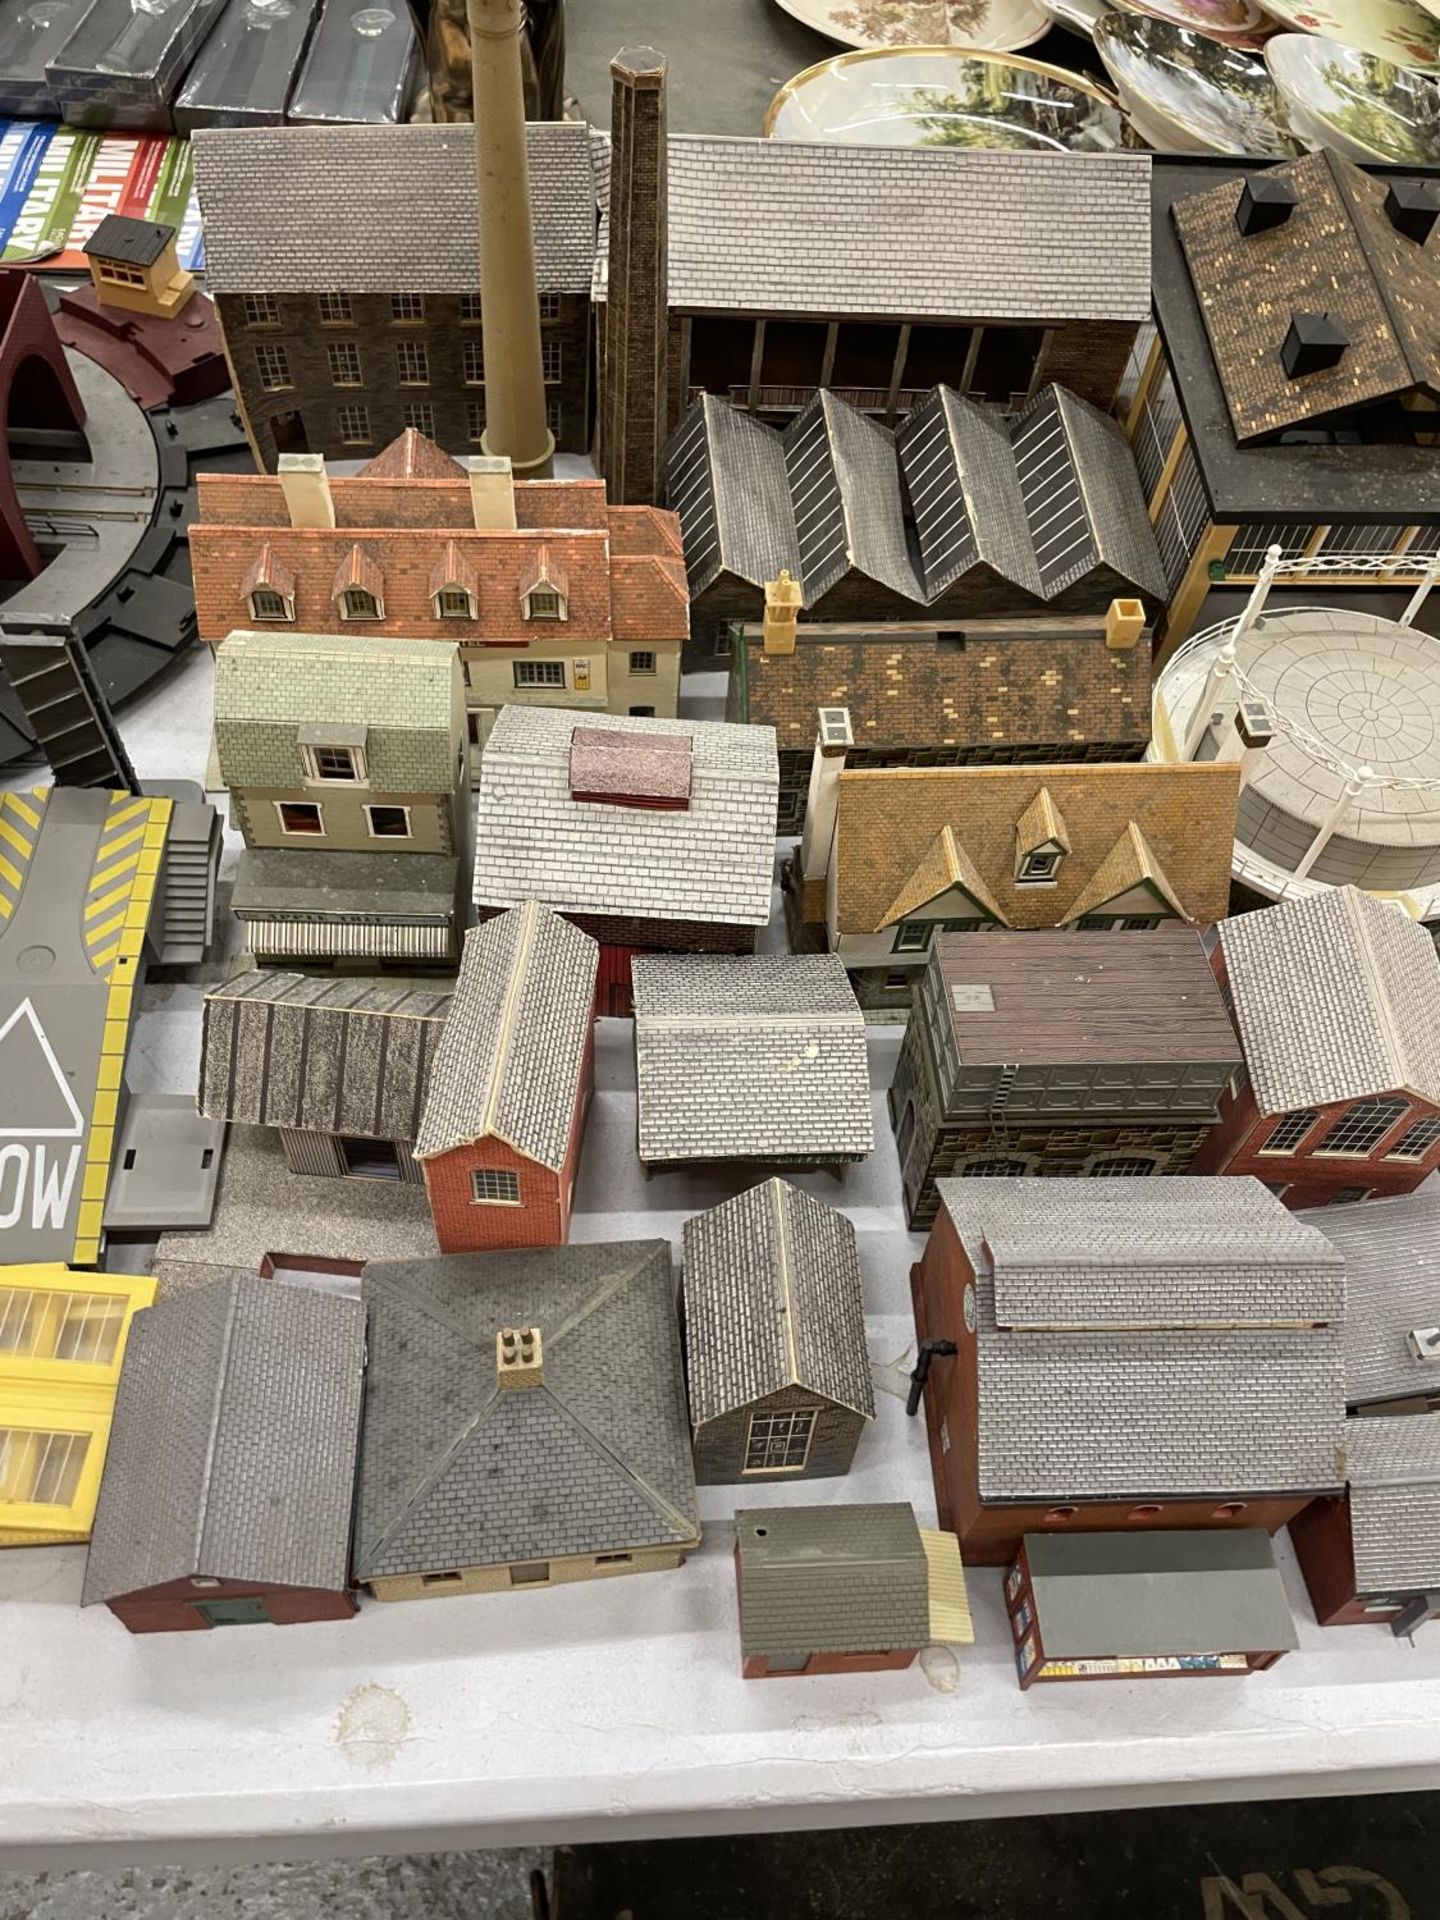 A LARGE MODEL RAILWAY TO INCLUDE HOUSES, SHEDS, BUILDINGS ETC - Image 4 of 6